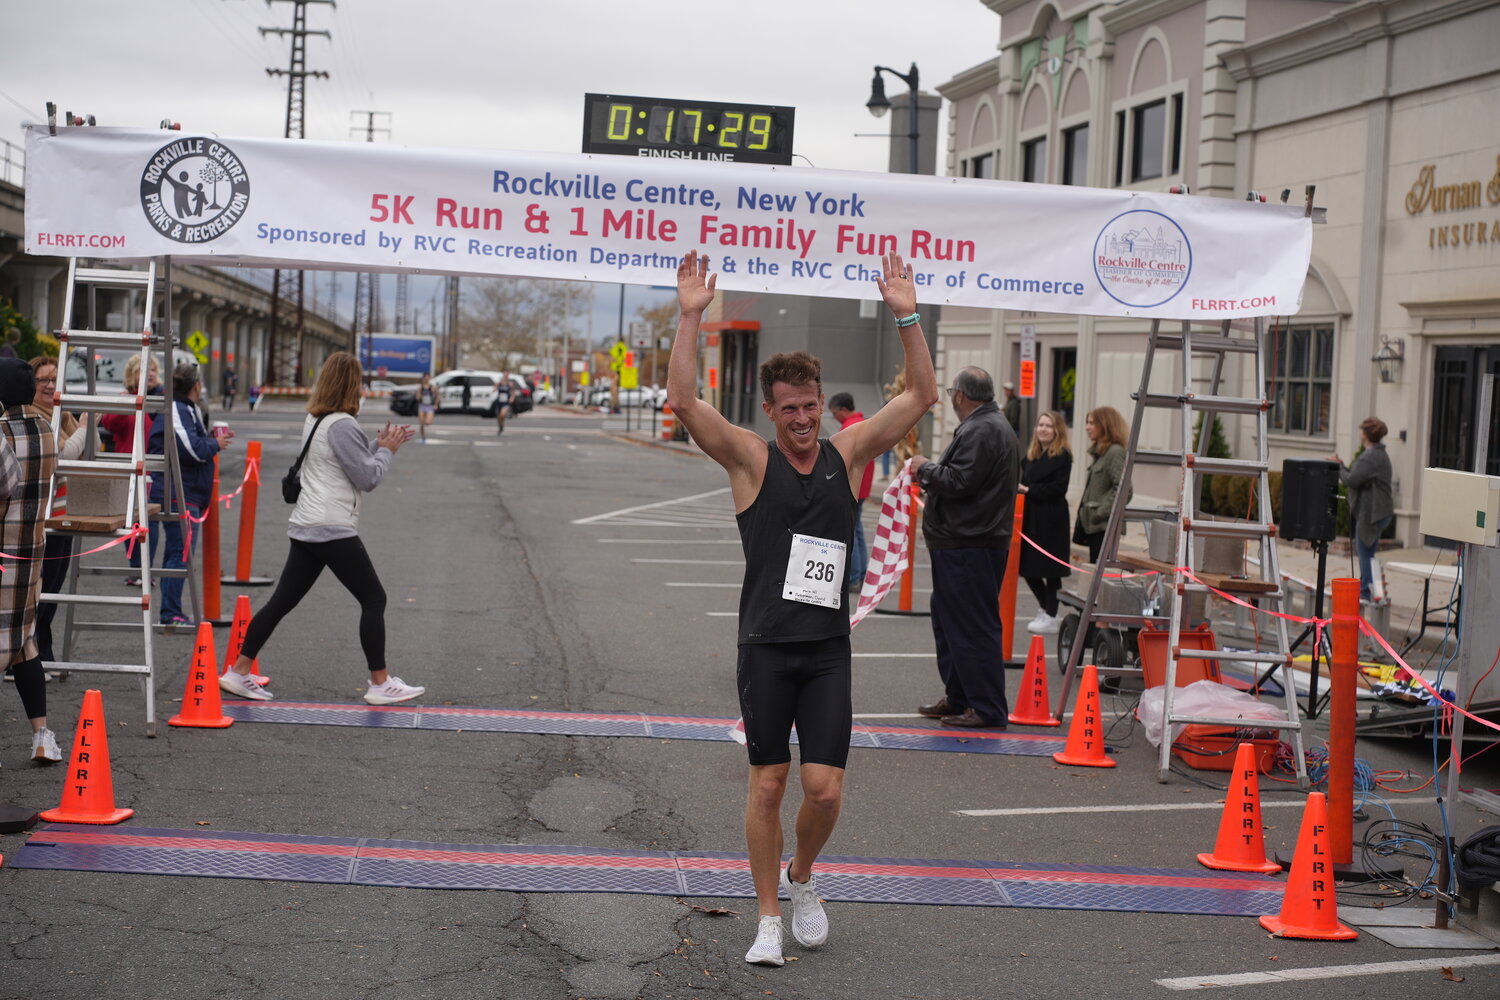 David Putterman, 41, of Rockville Centre finishes the annual 5k race in first-place for the second year-in-a-row with a final time of 17 minutes and 27 seconds.